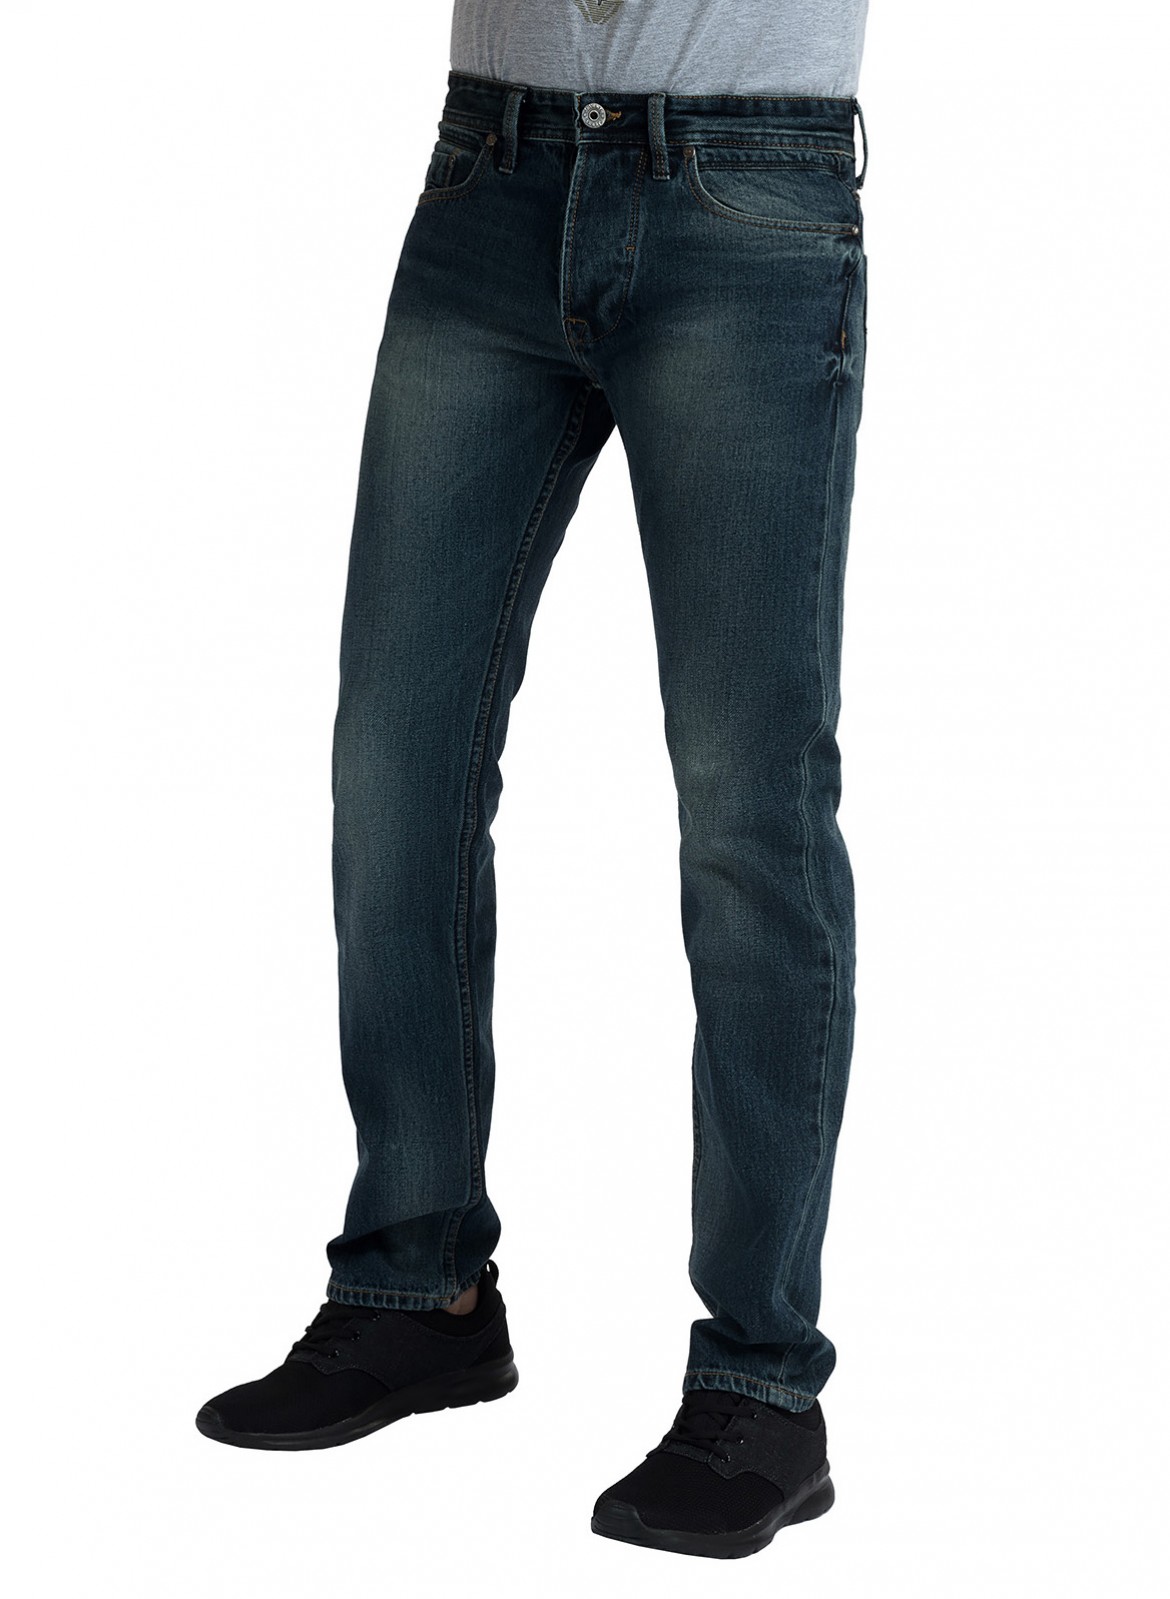 Regular jeans OXYGEN with bolts